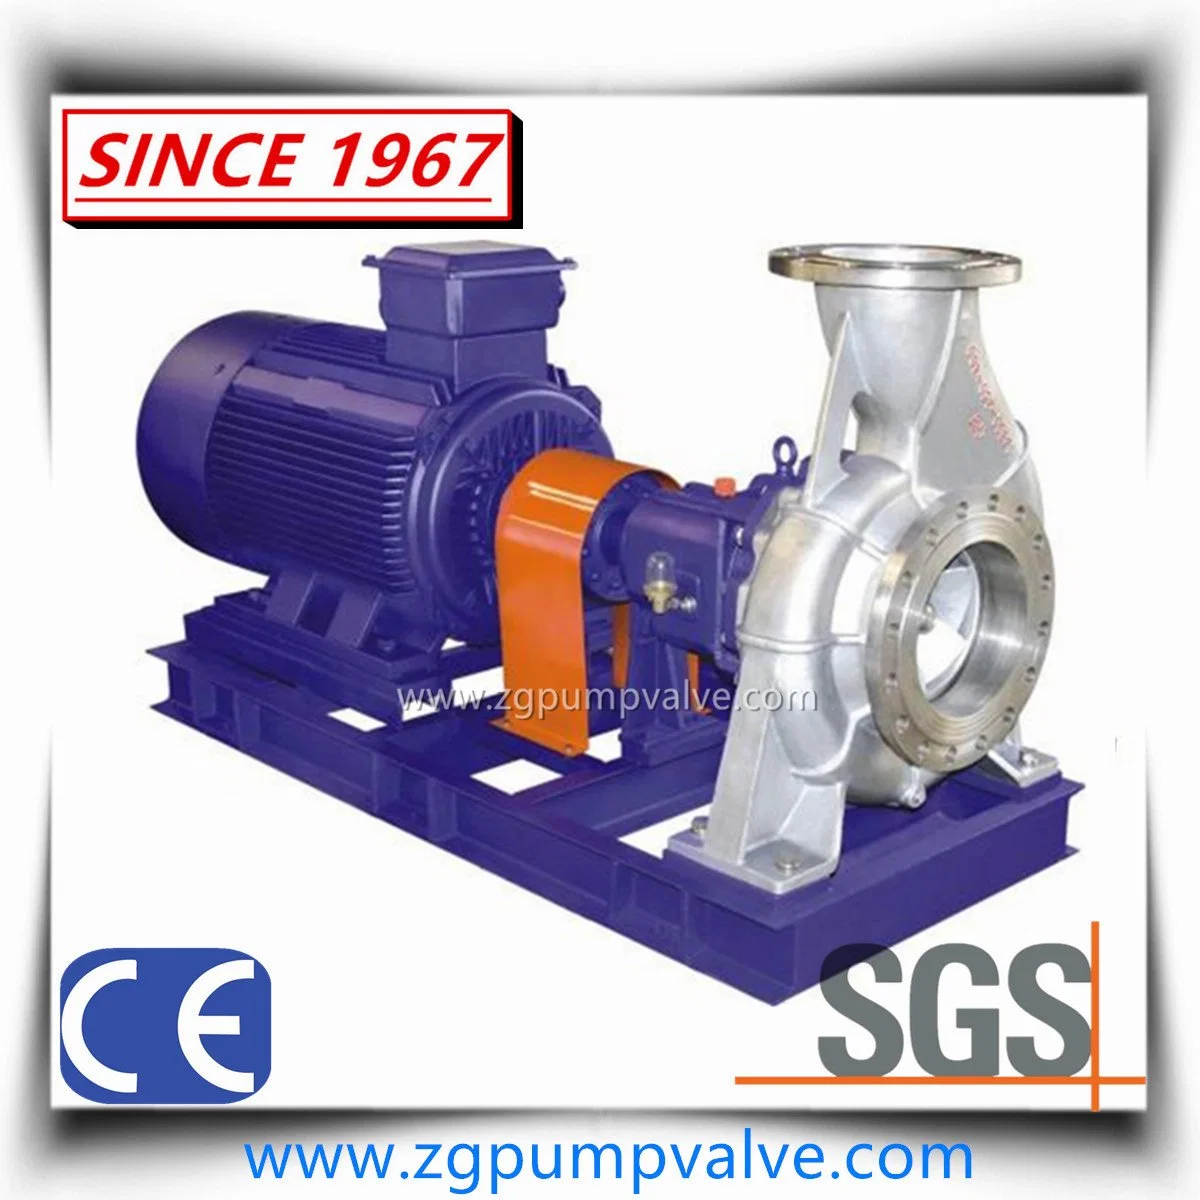 Horizontal Single Stage & Anti-Corrosive Sea Water Chemical Self-Priming Centrifugal Pump of Duplex Stainless Steel, Titanium, Nickel,Monel,Hastelloy,20 # Alloy